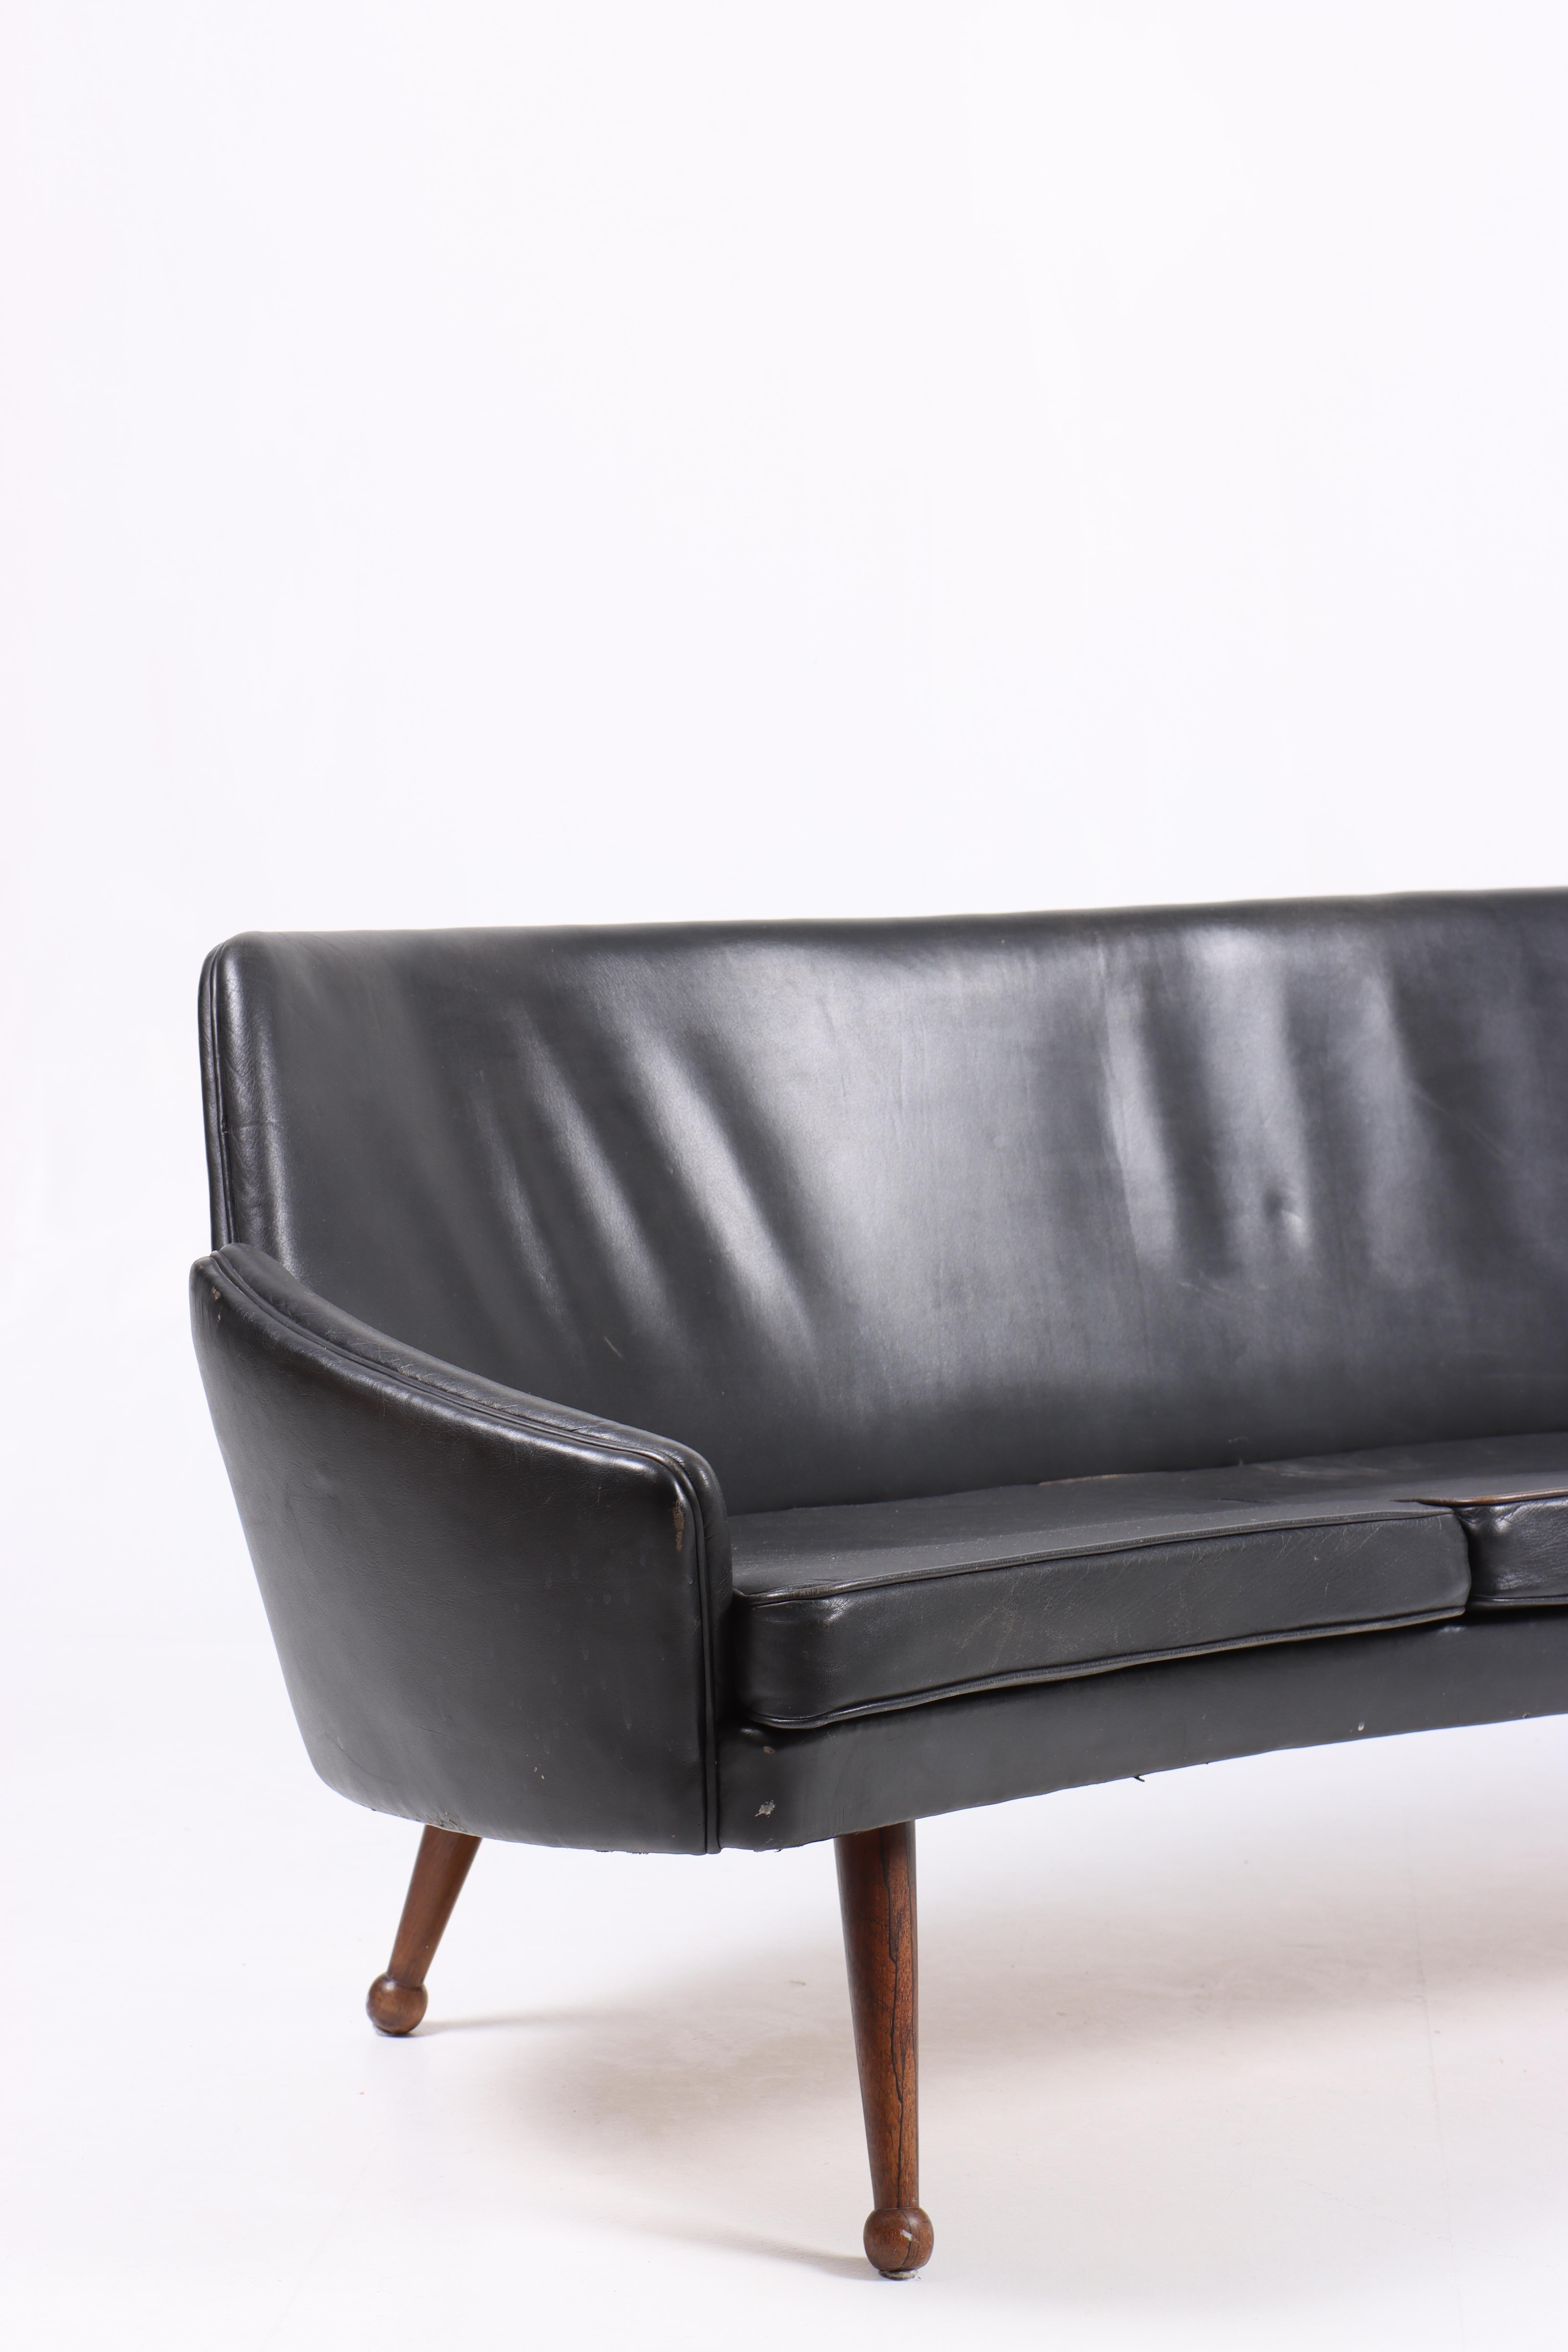 Midcentury Sofa in Patinated Leather, Danish Design 1950s For Sale 1